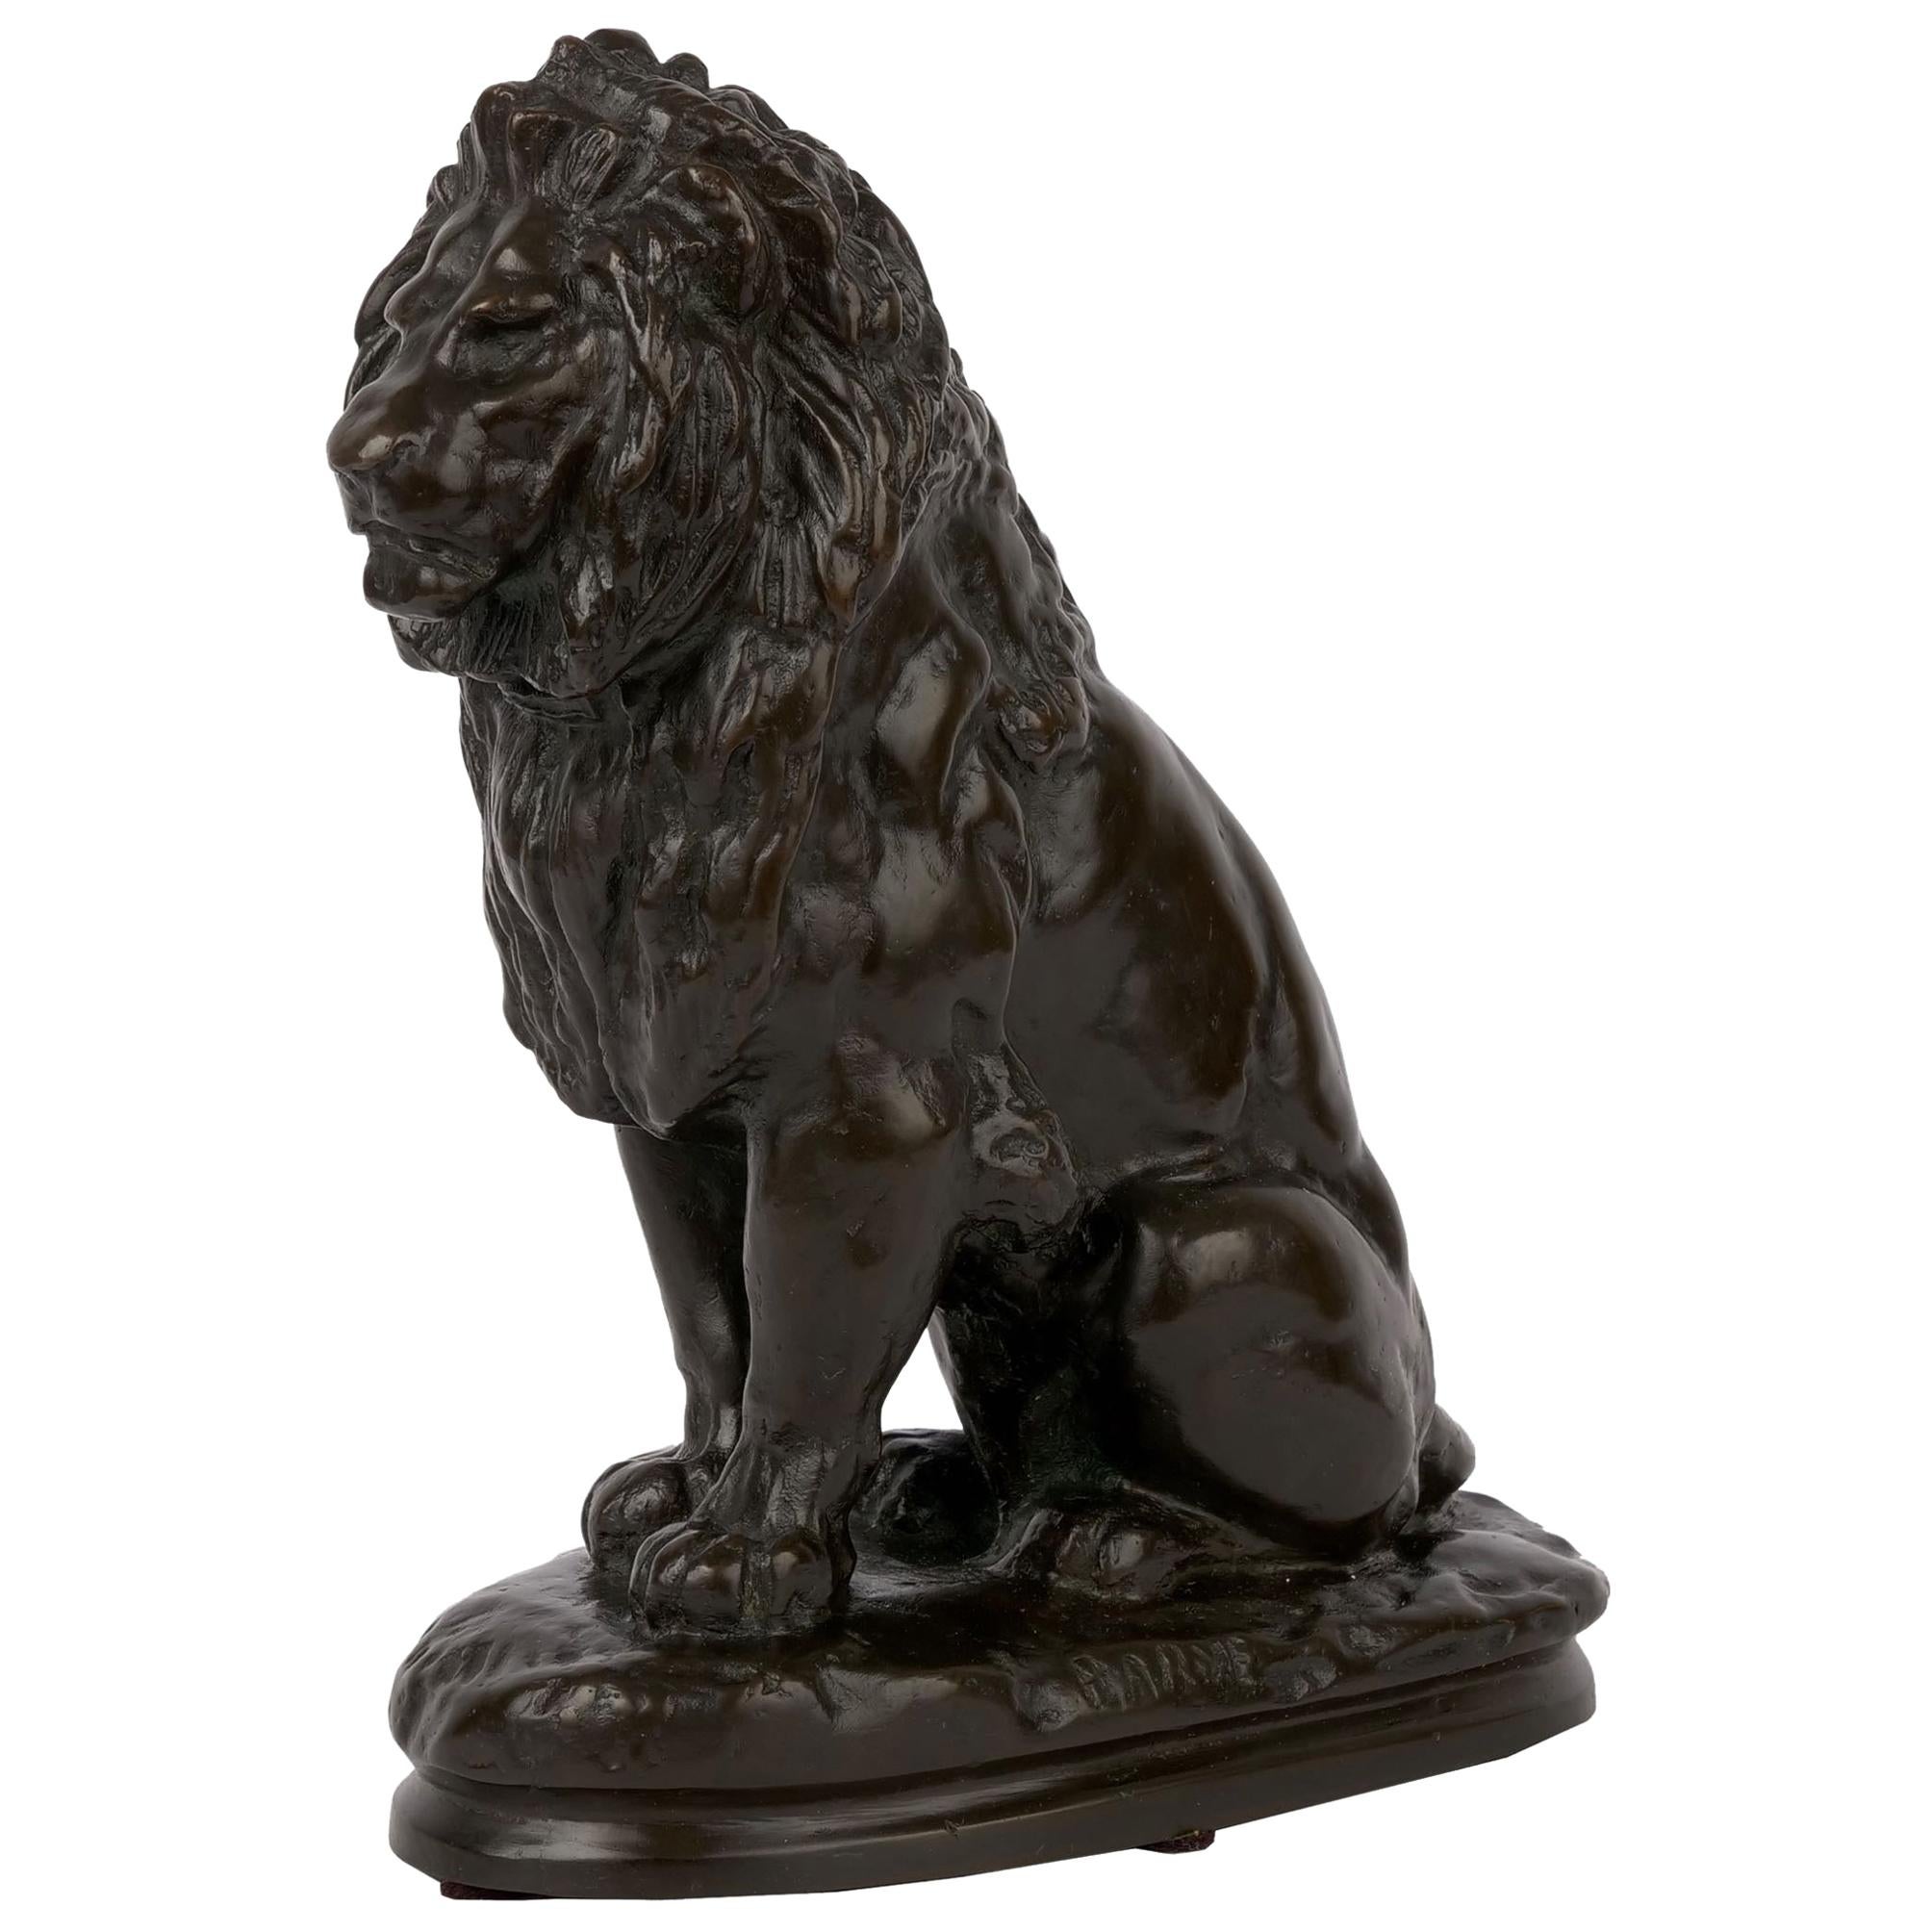 “Seated Lion” Antique French Bronze Sculpture Cast after Antoine-Louis Barye